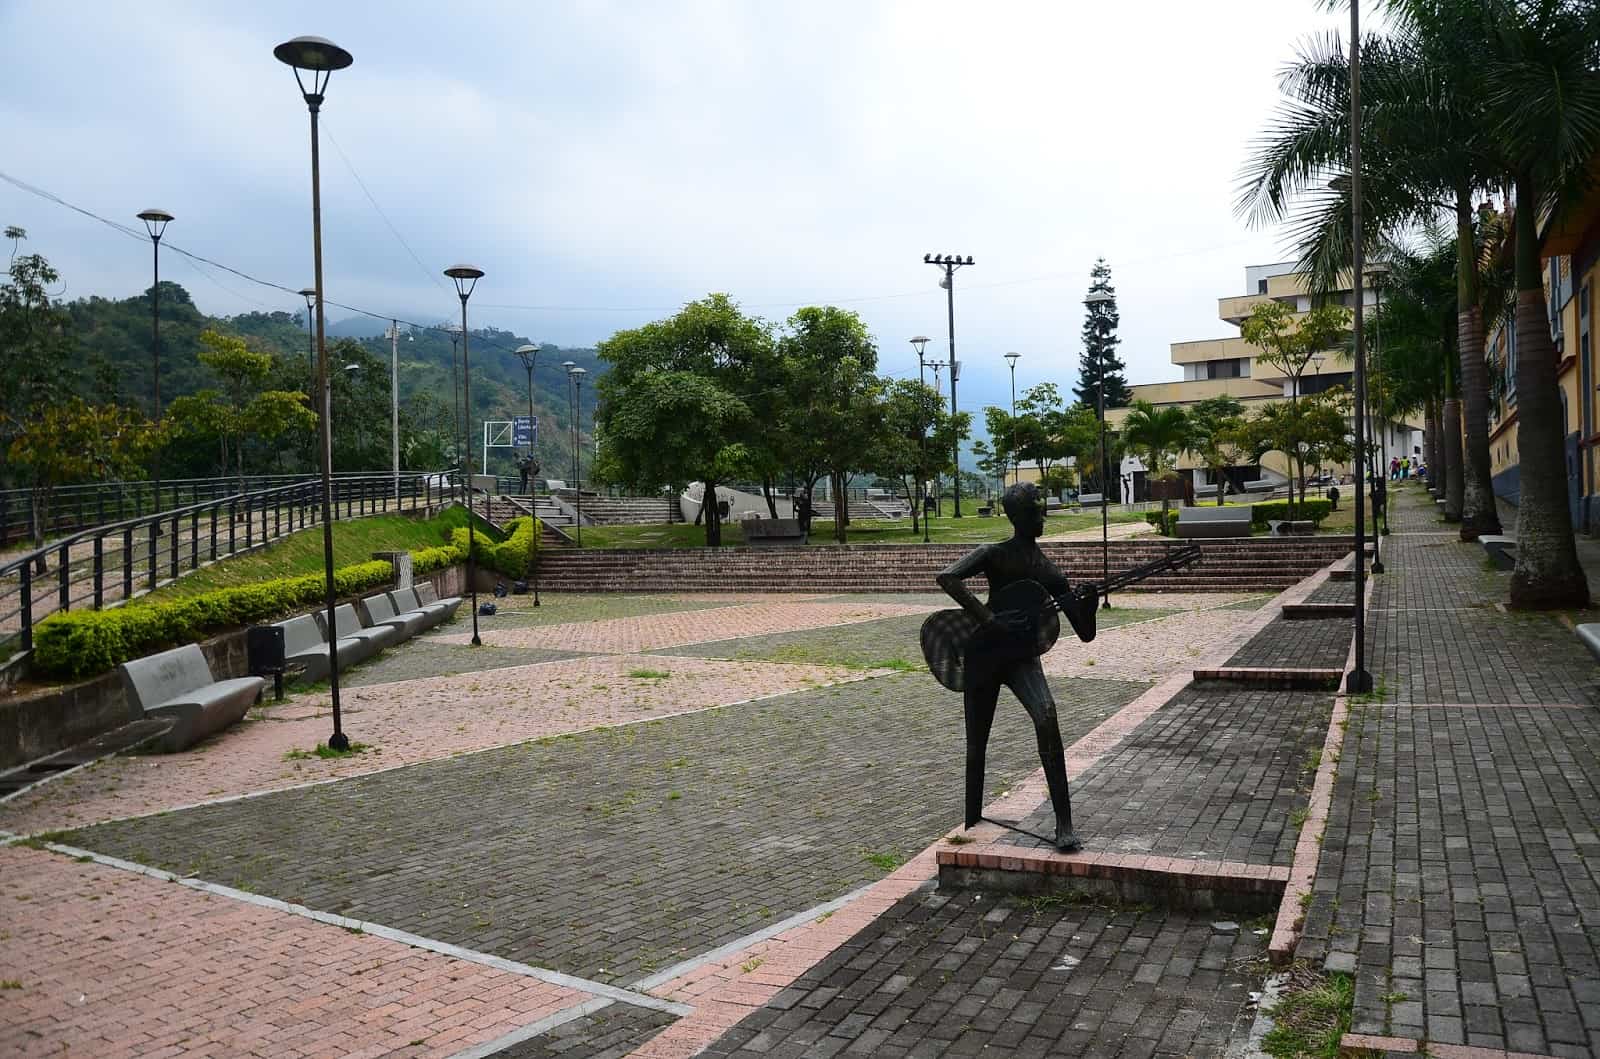 Music Park in Ibagué, Tolima, Colombia